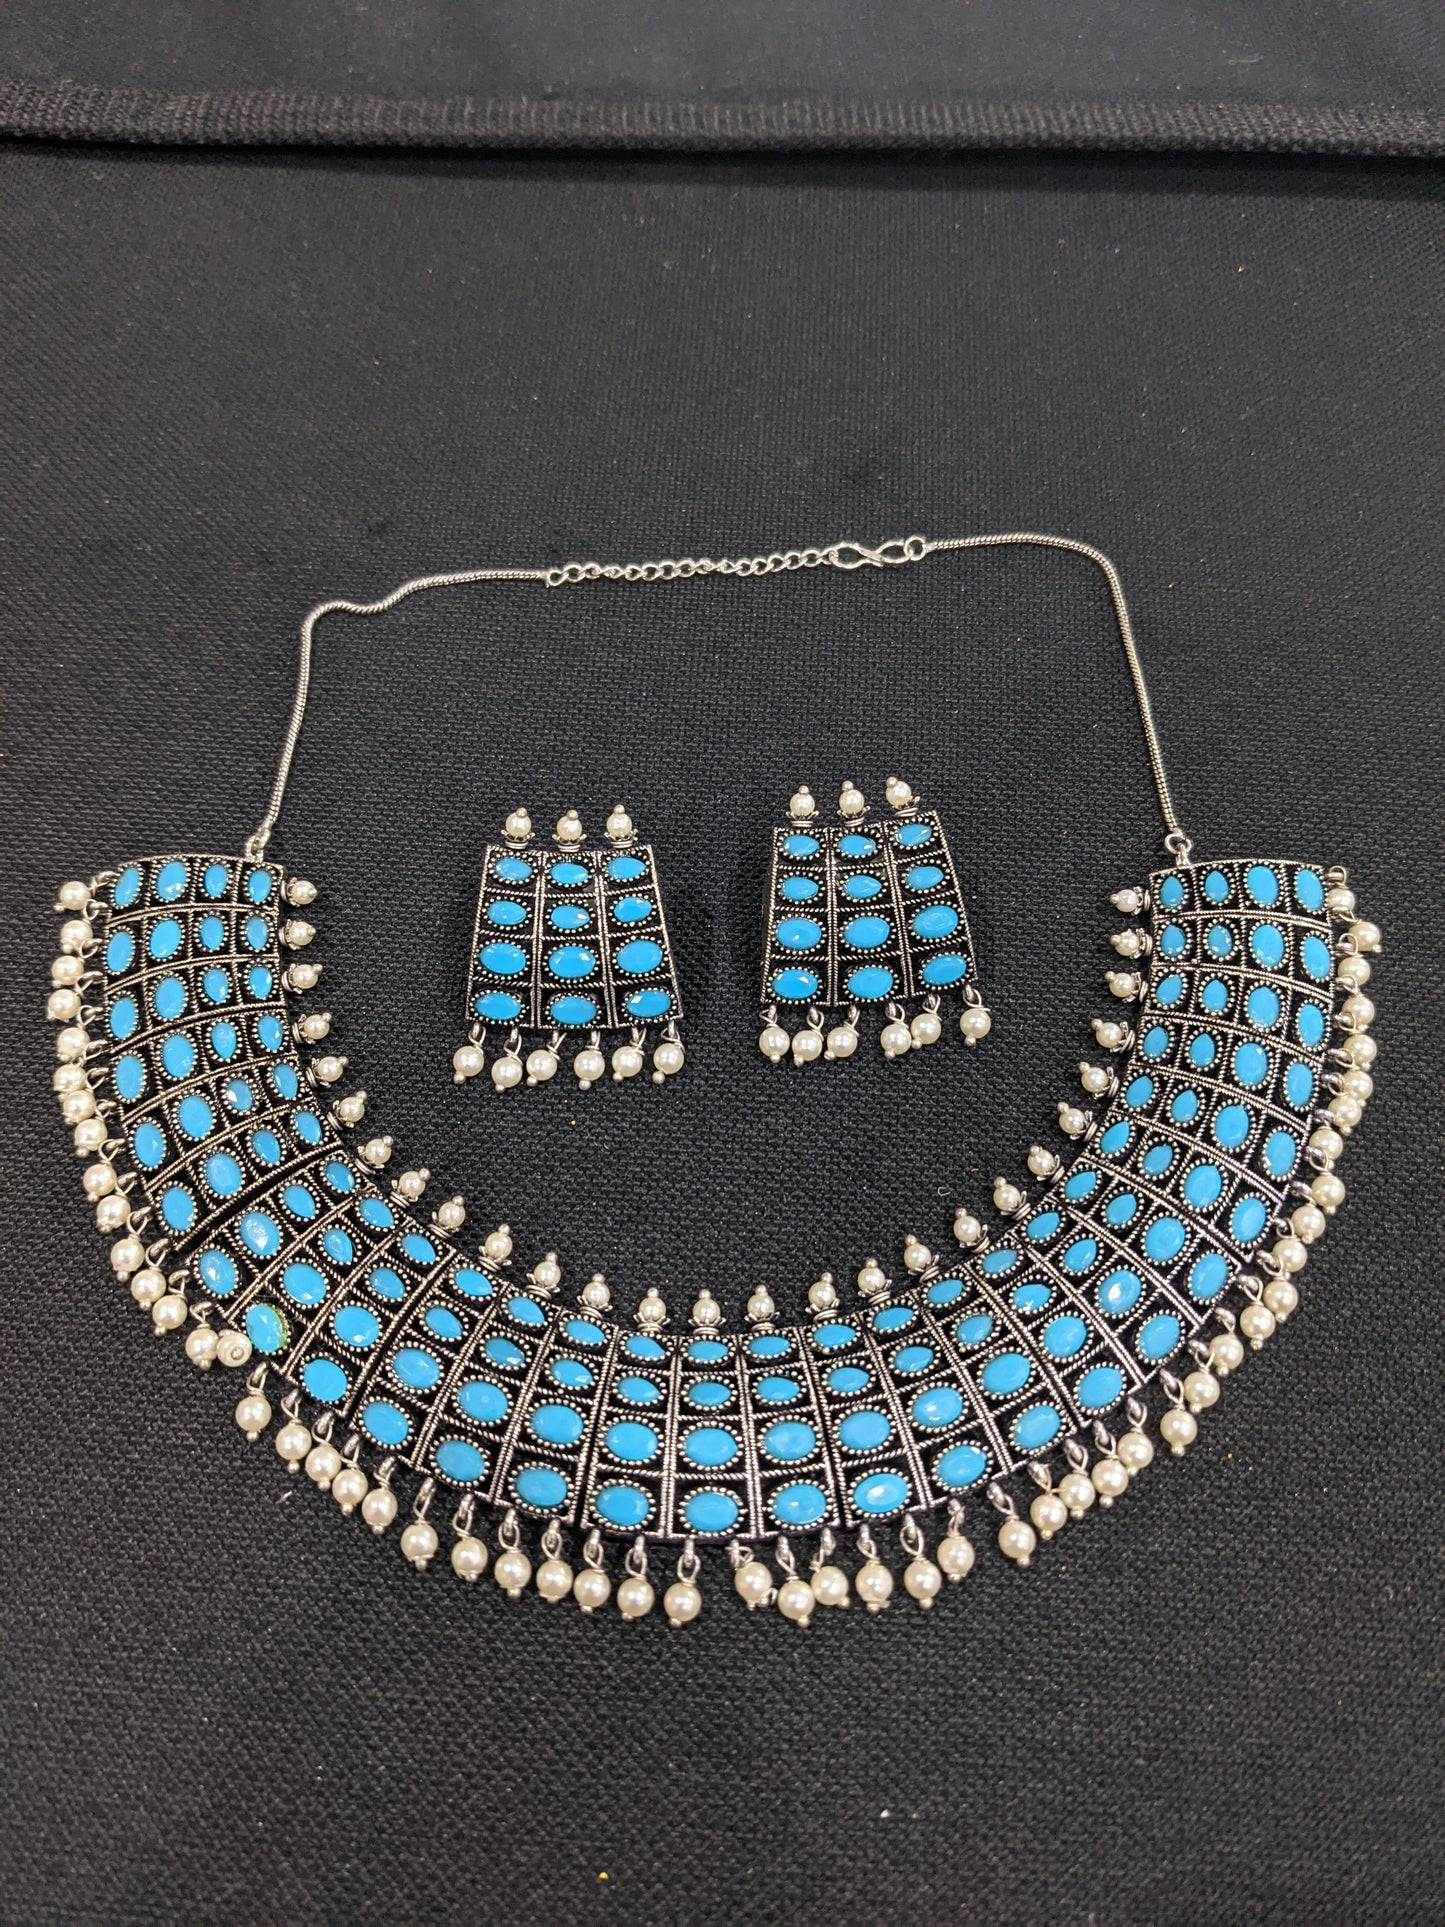 Four oval line Oxidized silver Choker Necklace and Earrings set